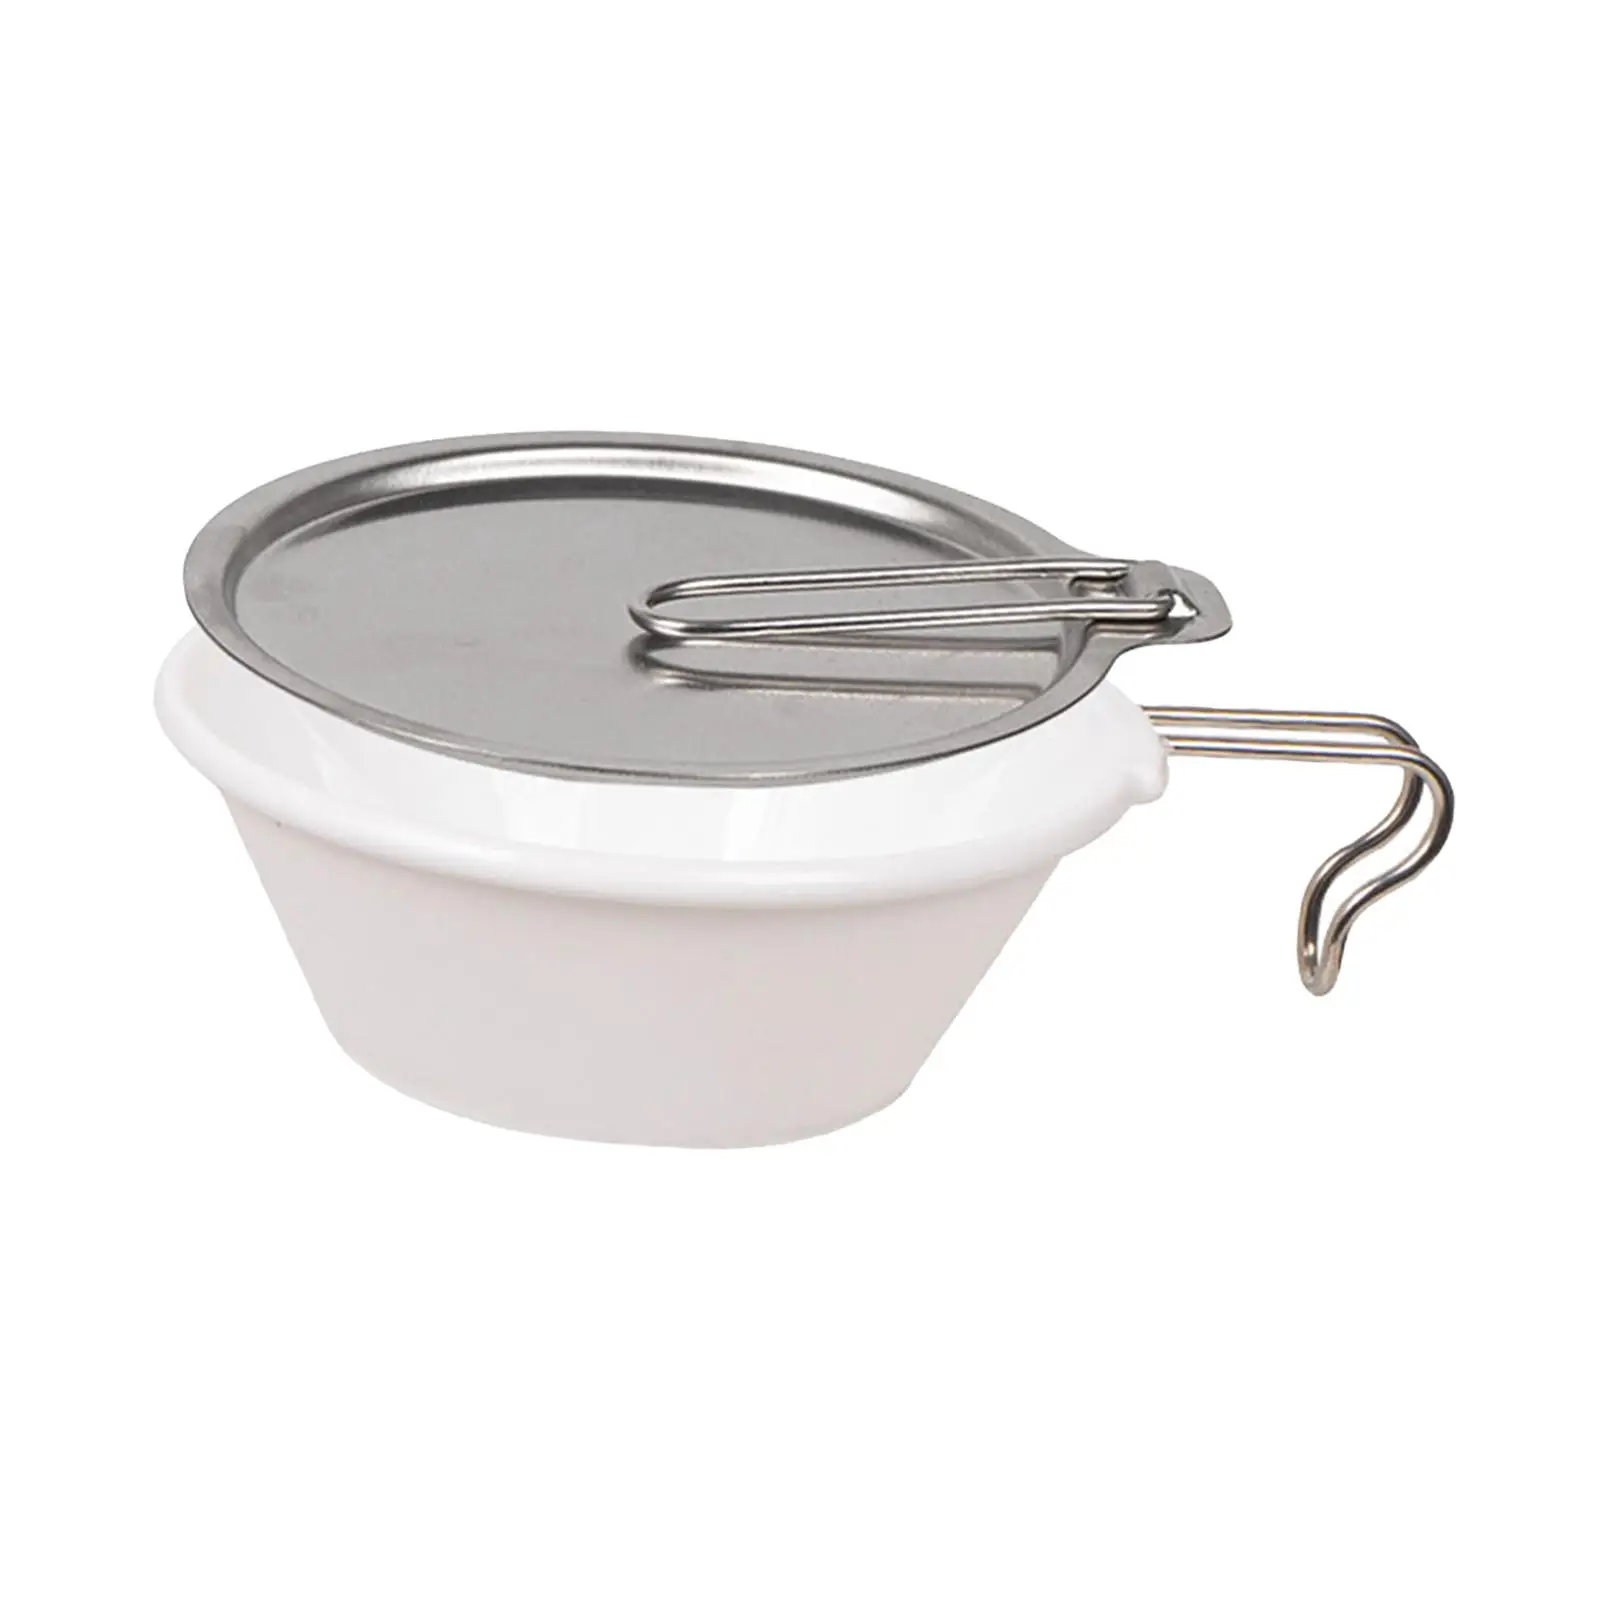 Camping Bowl with Lids and Handle Dessert Bowl Tableware Food Bowl Outdoor Cookware for BBQ Trekking Fishing Barbecue